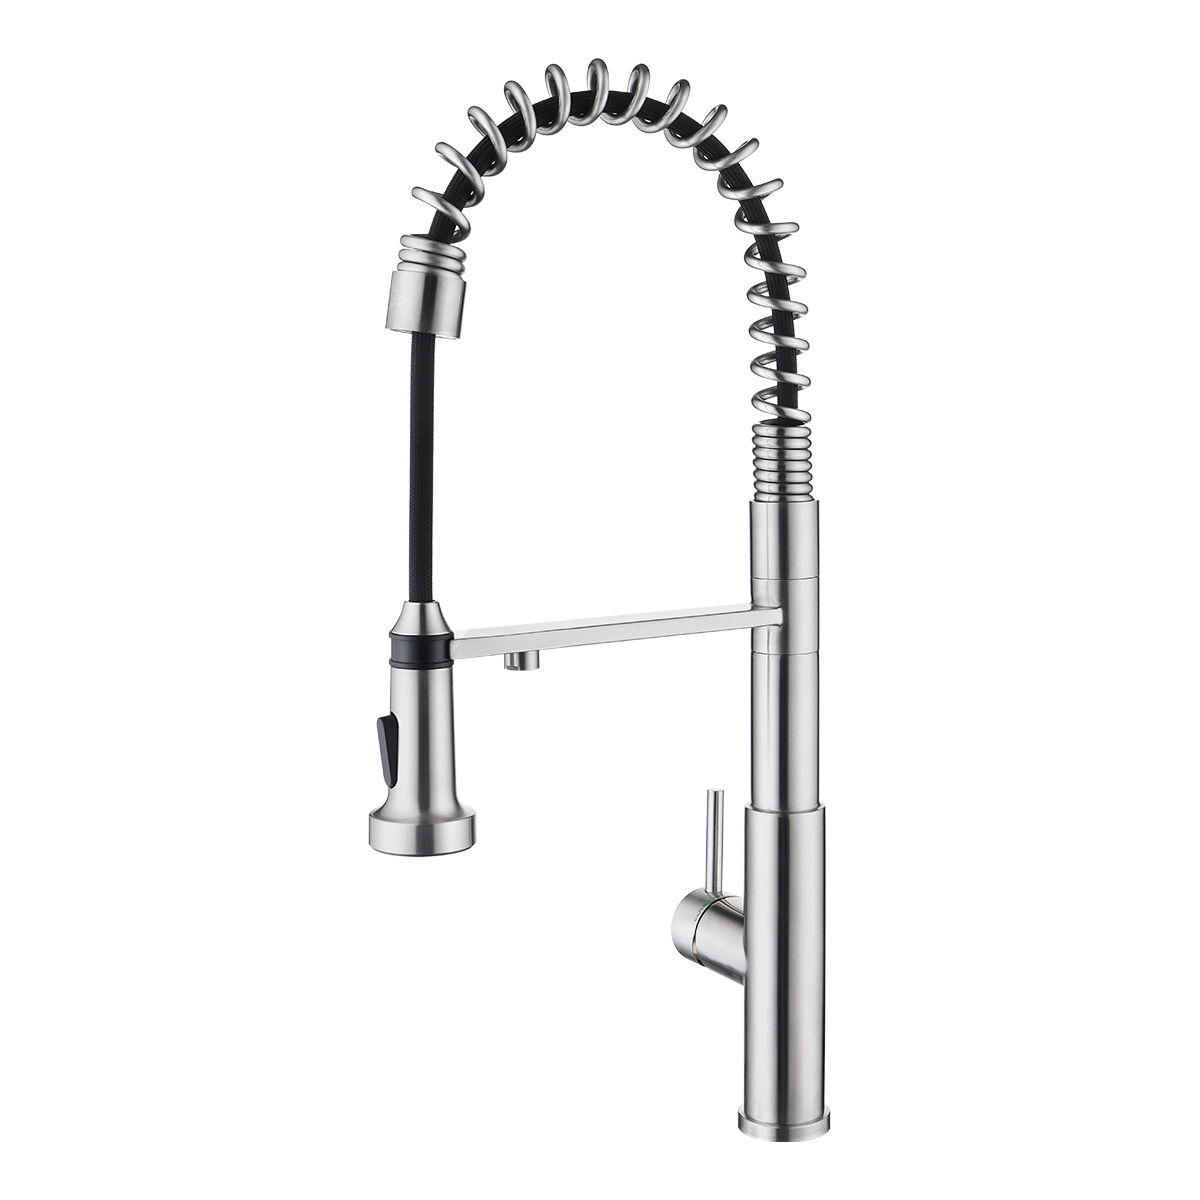 Filter Water Kitchen Faucet in Stainless Steel, 3 Way Kitchen Mixer Tap